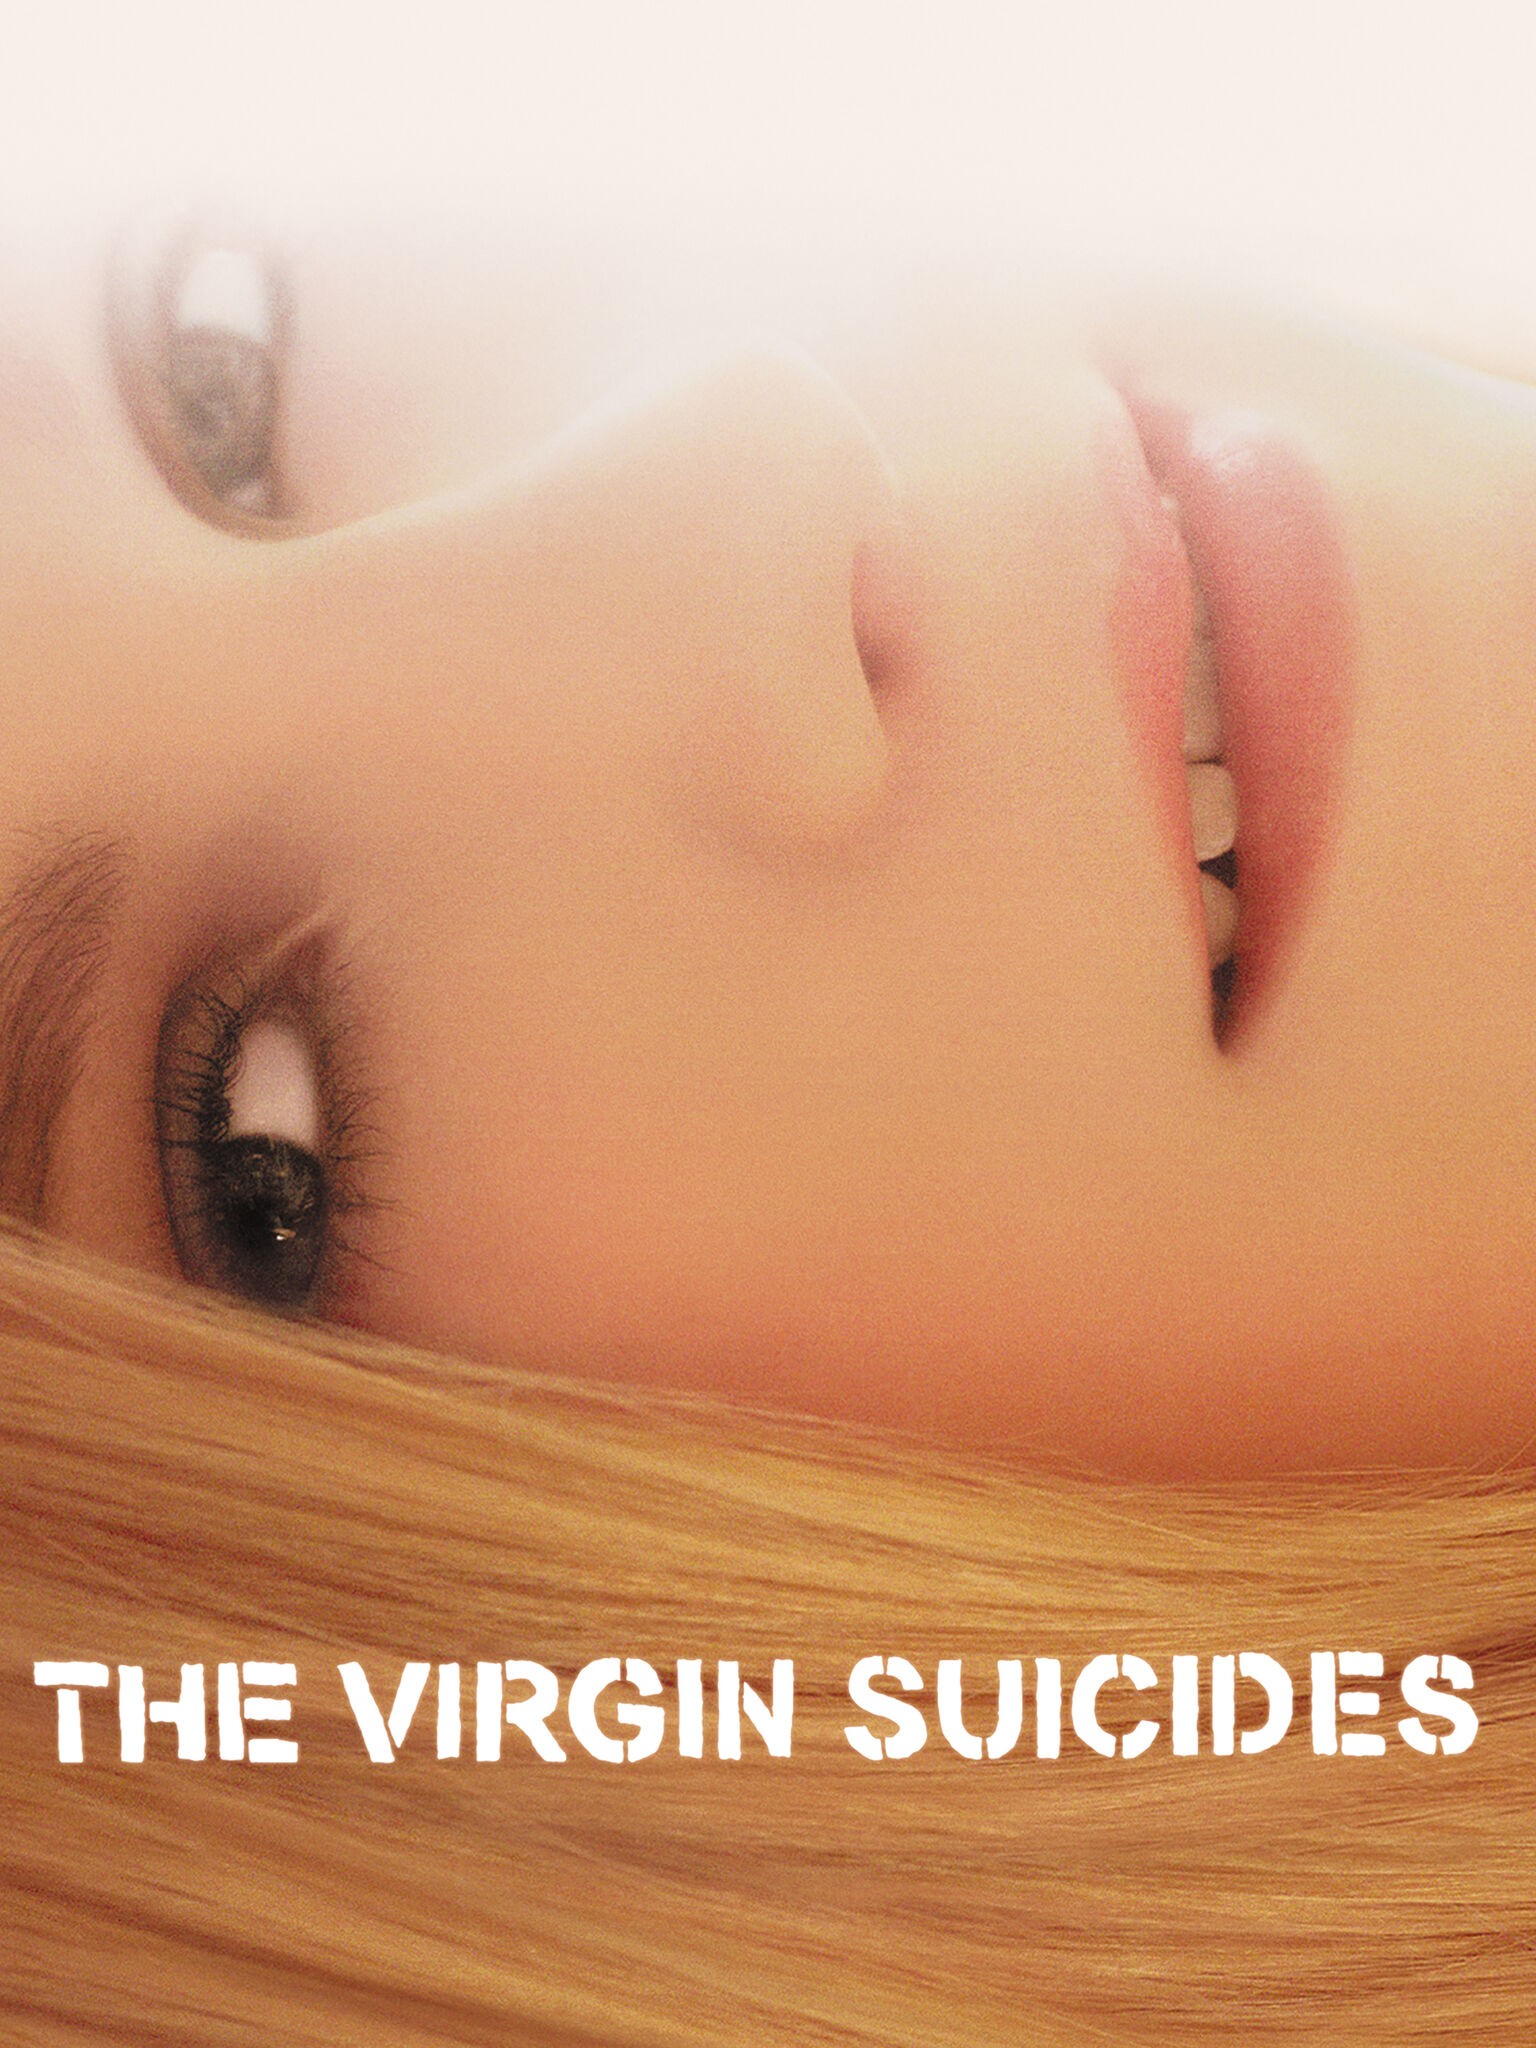 The Virgin Suicides - Rotten Tomatoes